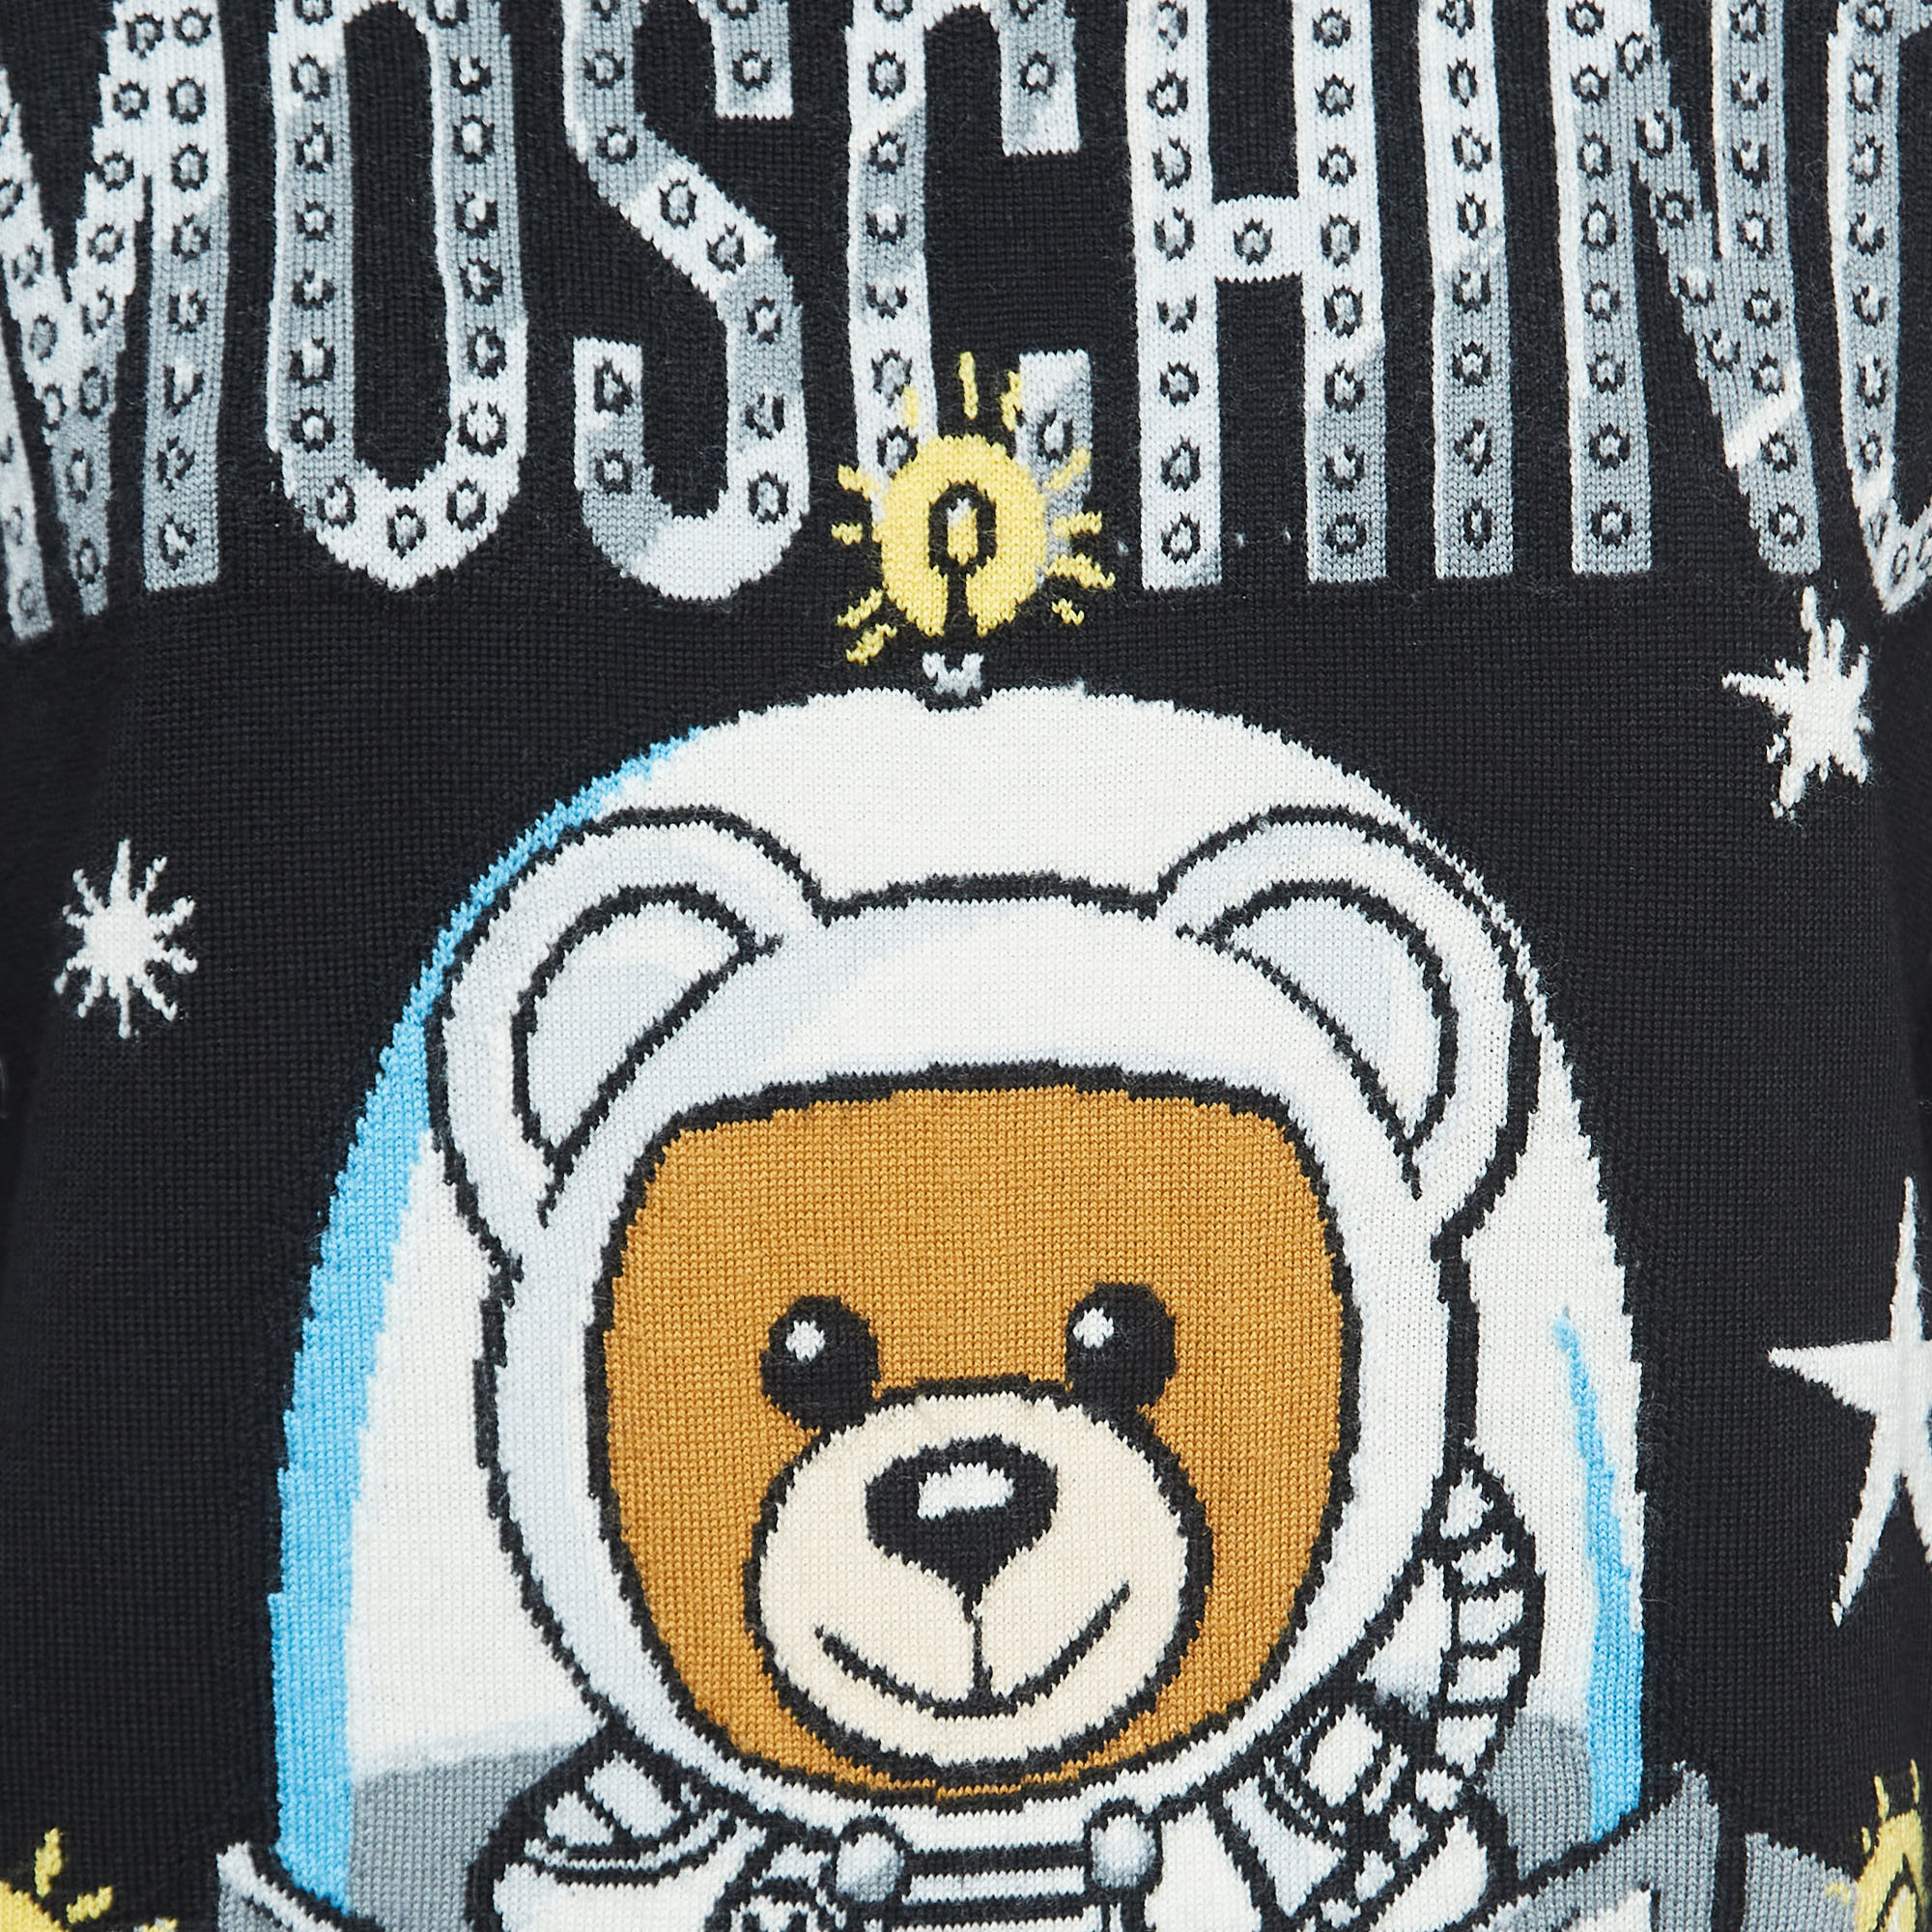 Moschino Couture Black Space Teddy Bear Wool Sweater XS